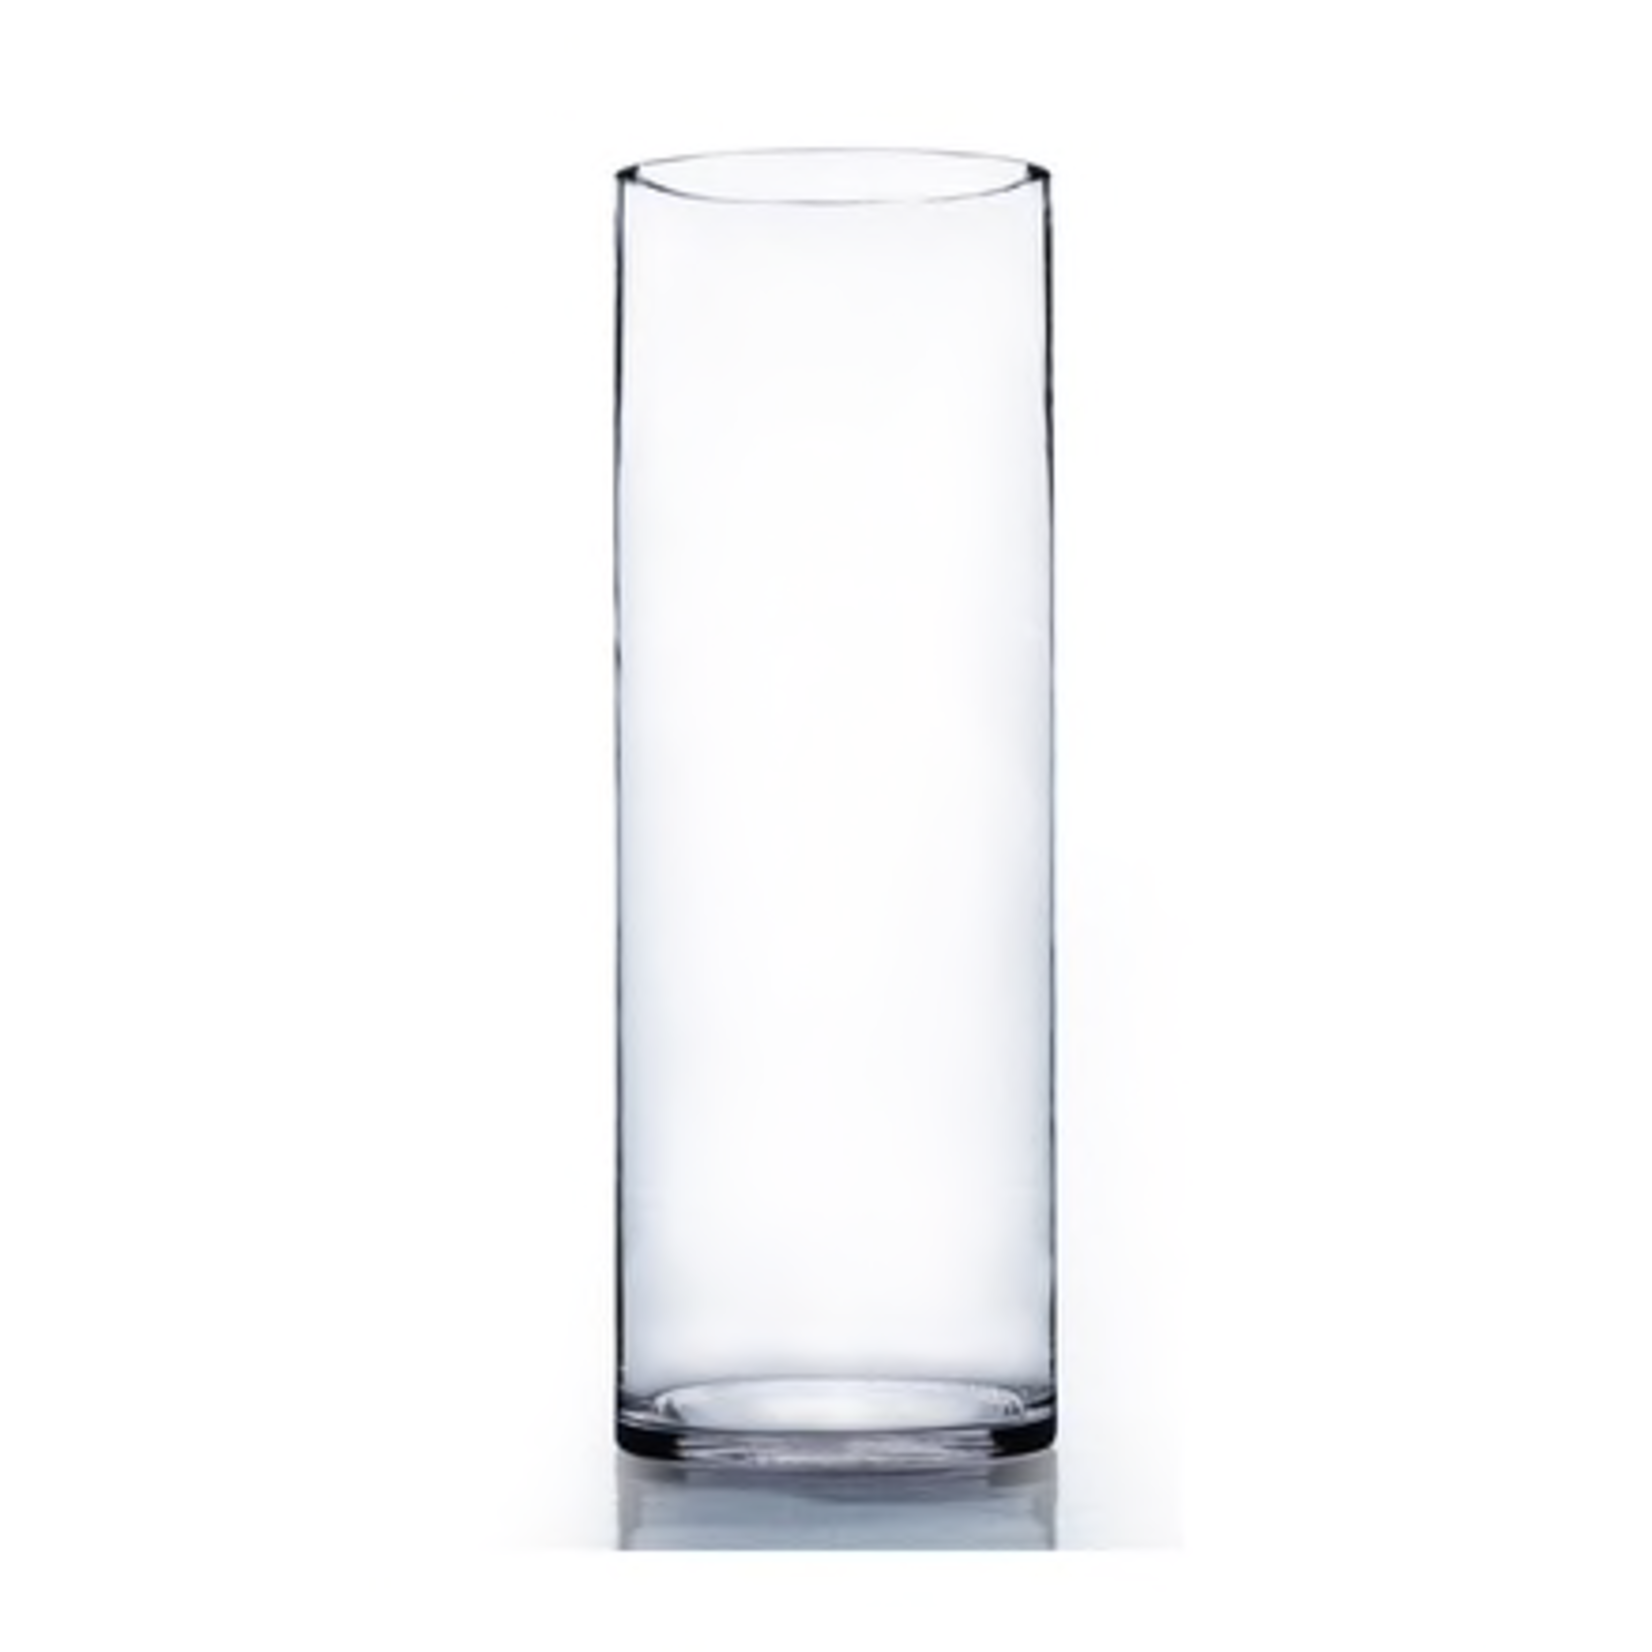 16"H X 6" CLEAR GLASS CYLINDER VASE